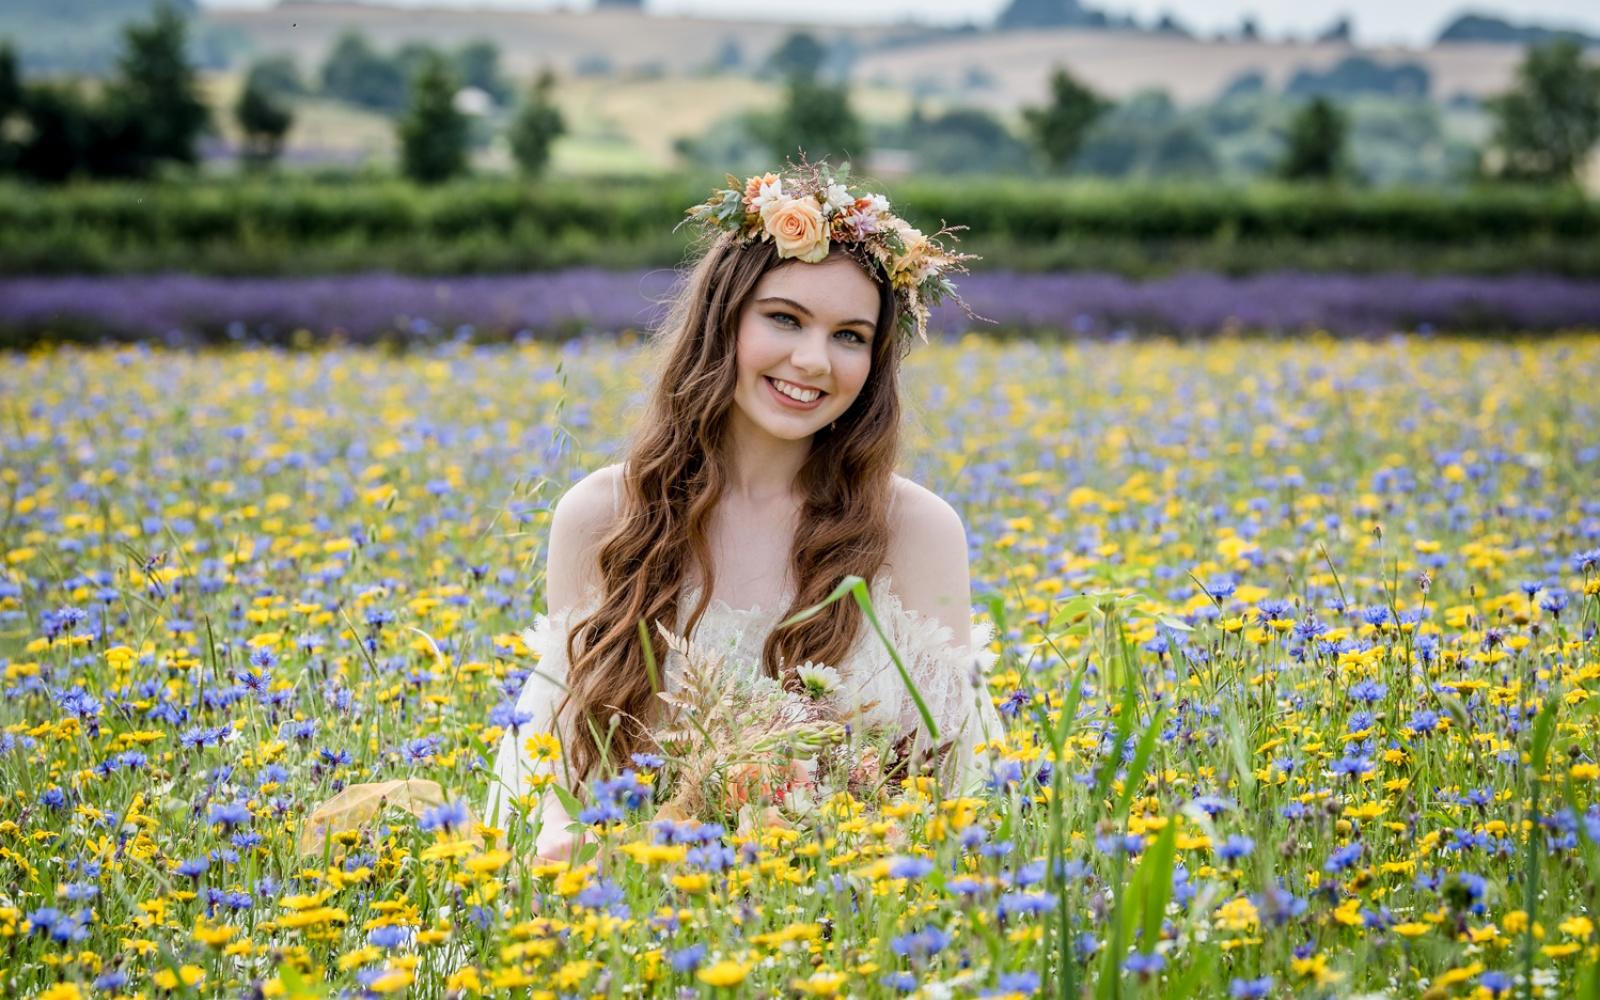 Styled Shoot ideas inspiration Capture Every Moment Make Up by Carissa Wendy House Flowers Willoughby Wolf lavender fields Snowshill wildflower meadow flower crown yellow blue